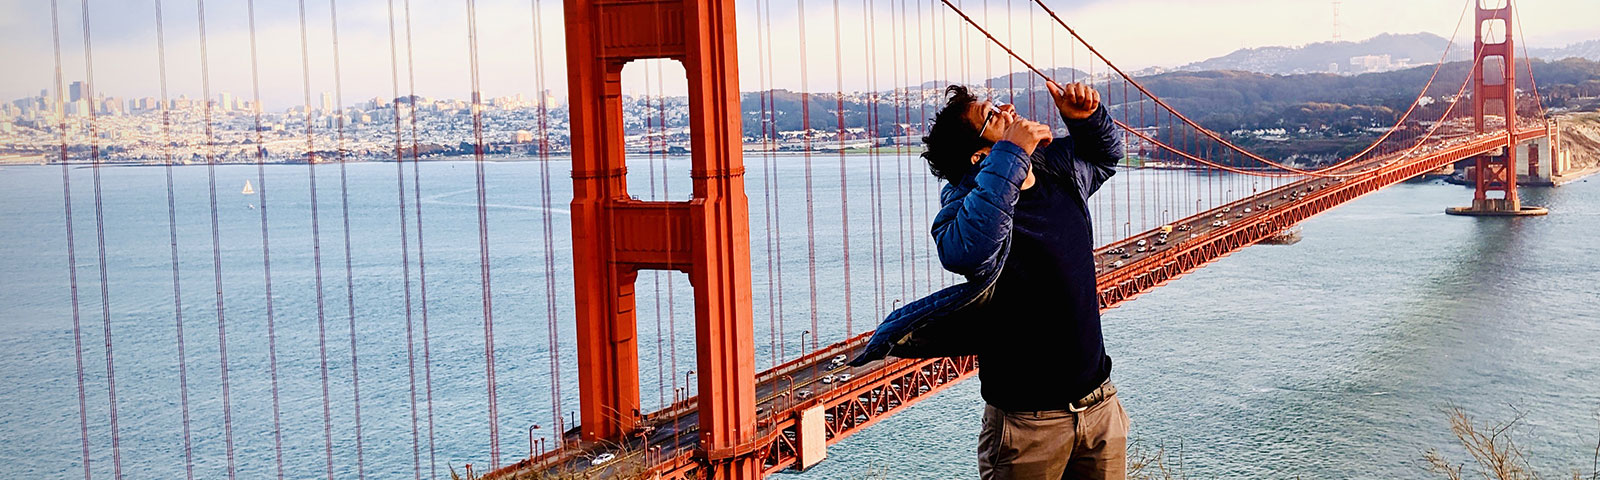 Male holding two thumbs up and looking to the sky with the Golden Gate Bridge and ocean in the background